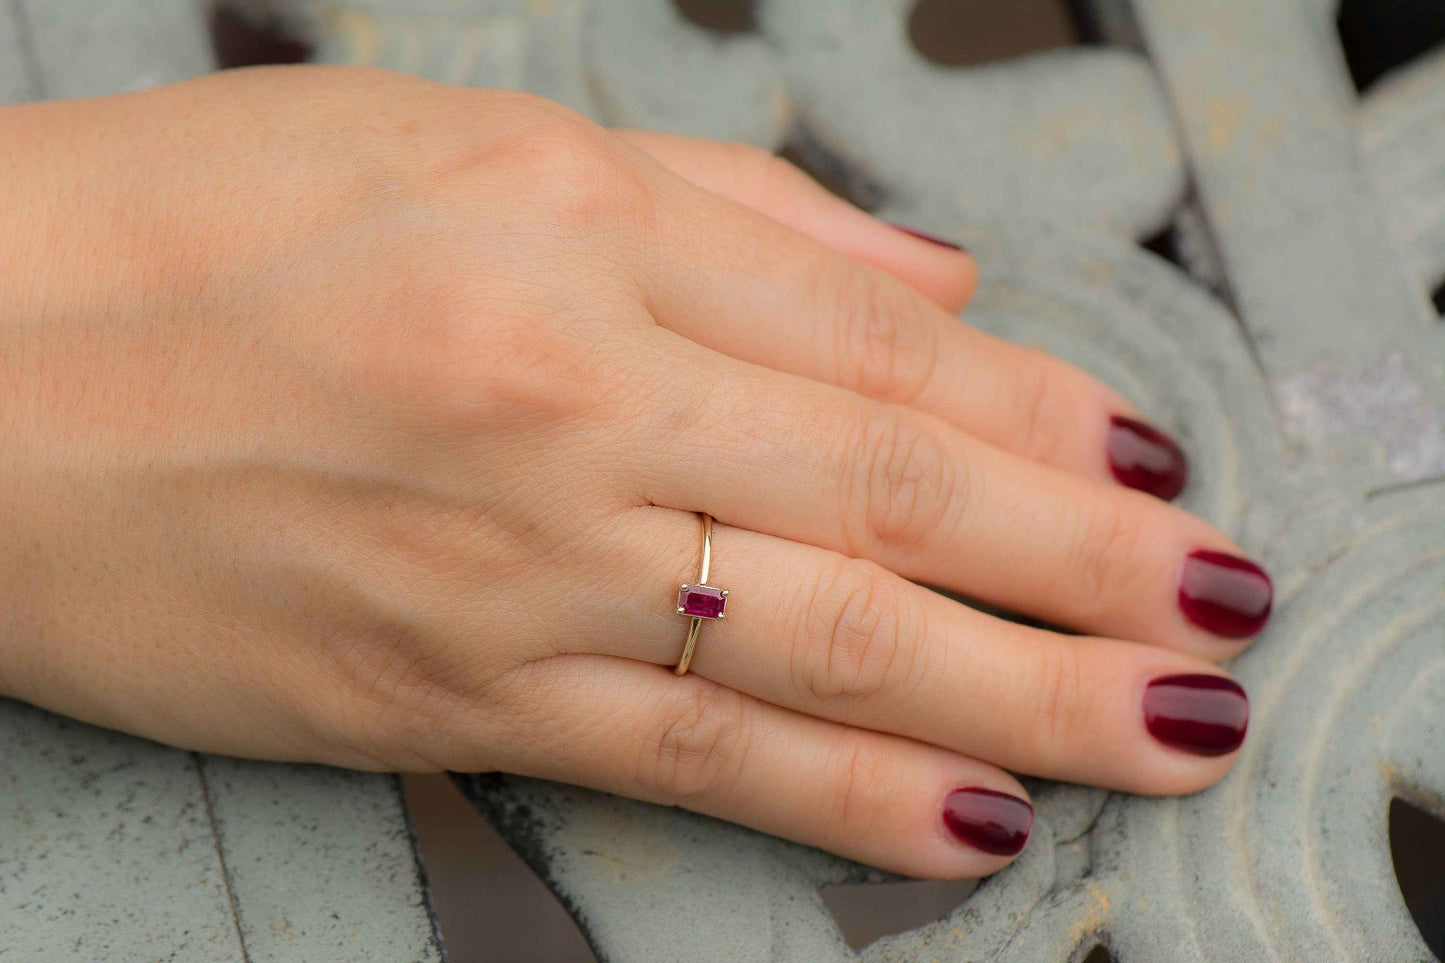 14k Gold Emerald Cut Ruby Solitaire Ring